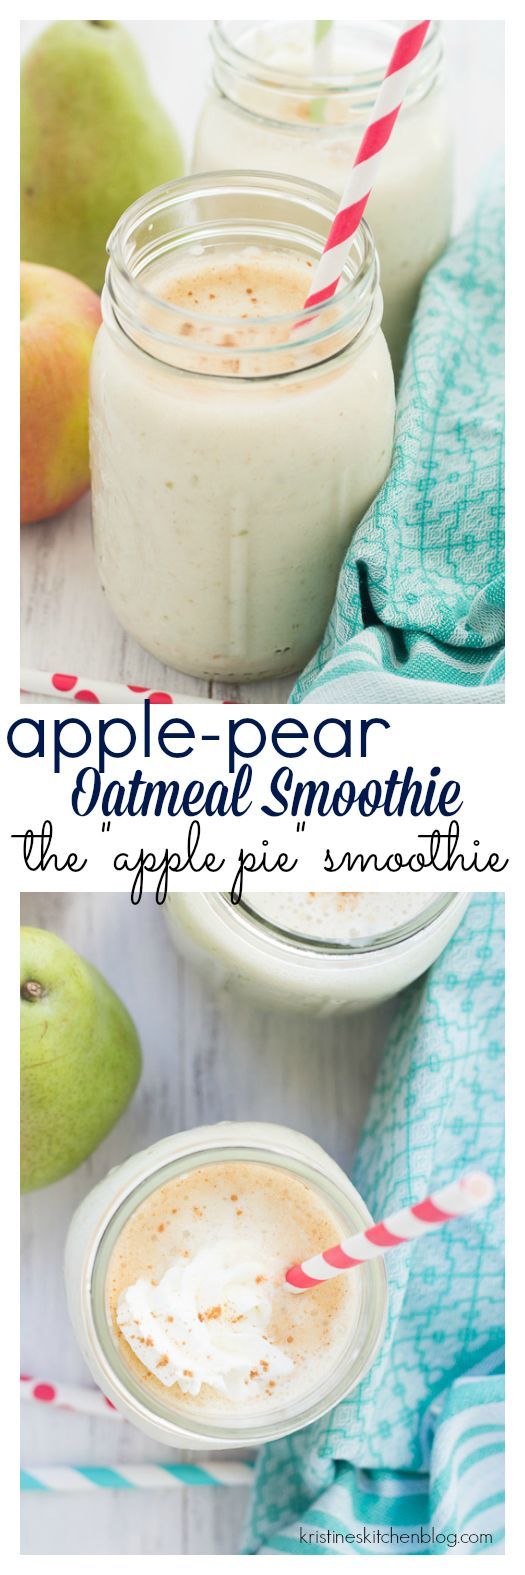 A deliciously healthy way to start your day, this breakfast smoothie tastes like apple pie!